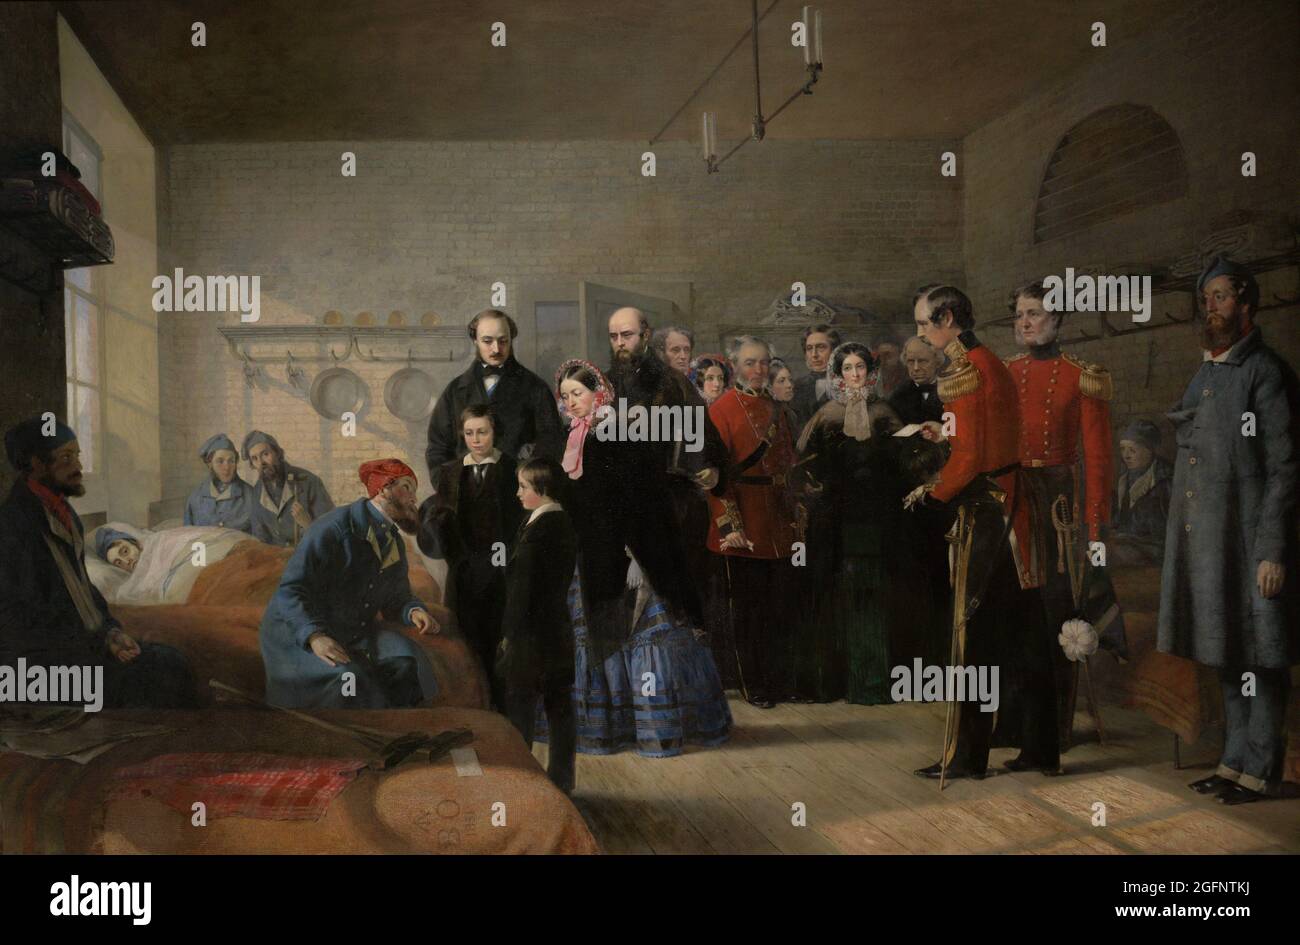 Queen Victoria (1819-1901). Queen of United Kingdom. Queen Victoria's First Visit to her Wounded Soldiers. The Queen visiting the Crimean war wounded at Brompton Hospital, Chatham, on 3rd March, 1855 with her husband Prince Albert and their two sons, Prince of Wales and Prince Alfred. Painting by Jerry Barrett (1824-1906). Oil on canvas (148 x 219,3 cm), 1856. National Portrait Gallery. London, England. Stock Photo